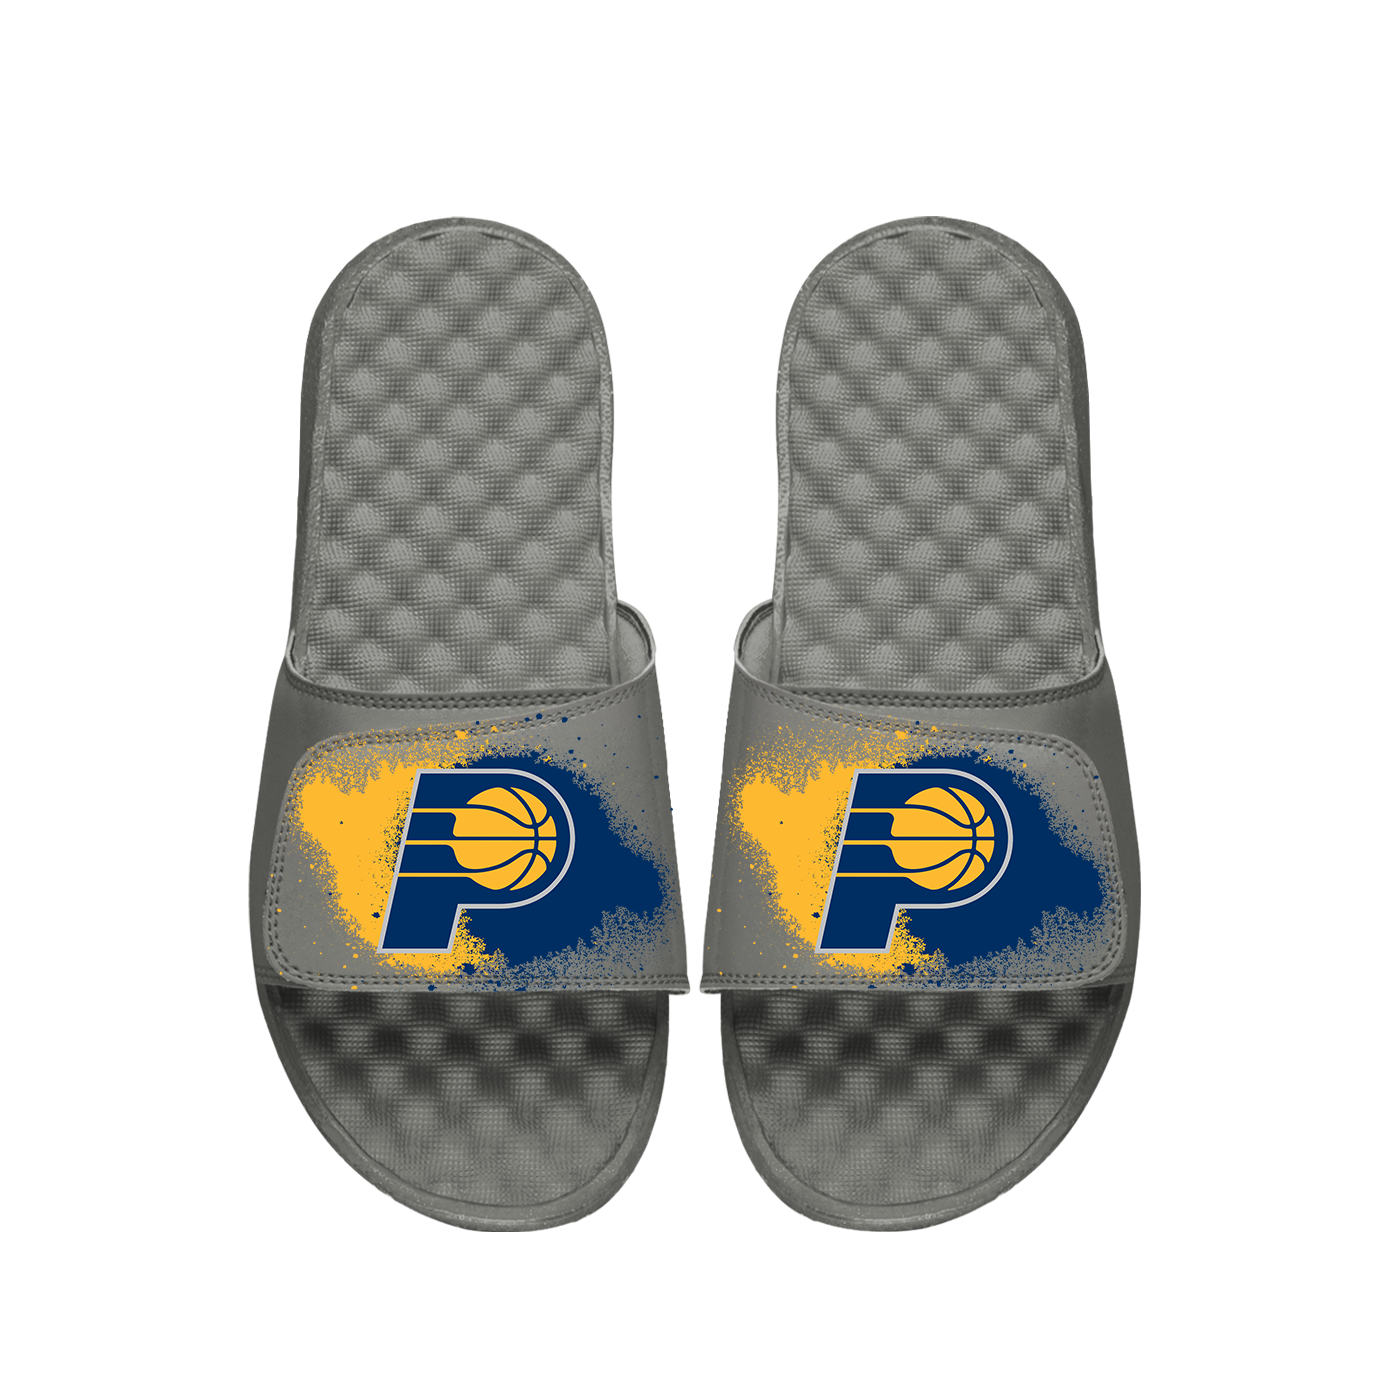 Indiana Pacers Spray Paint Slides